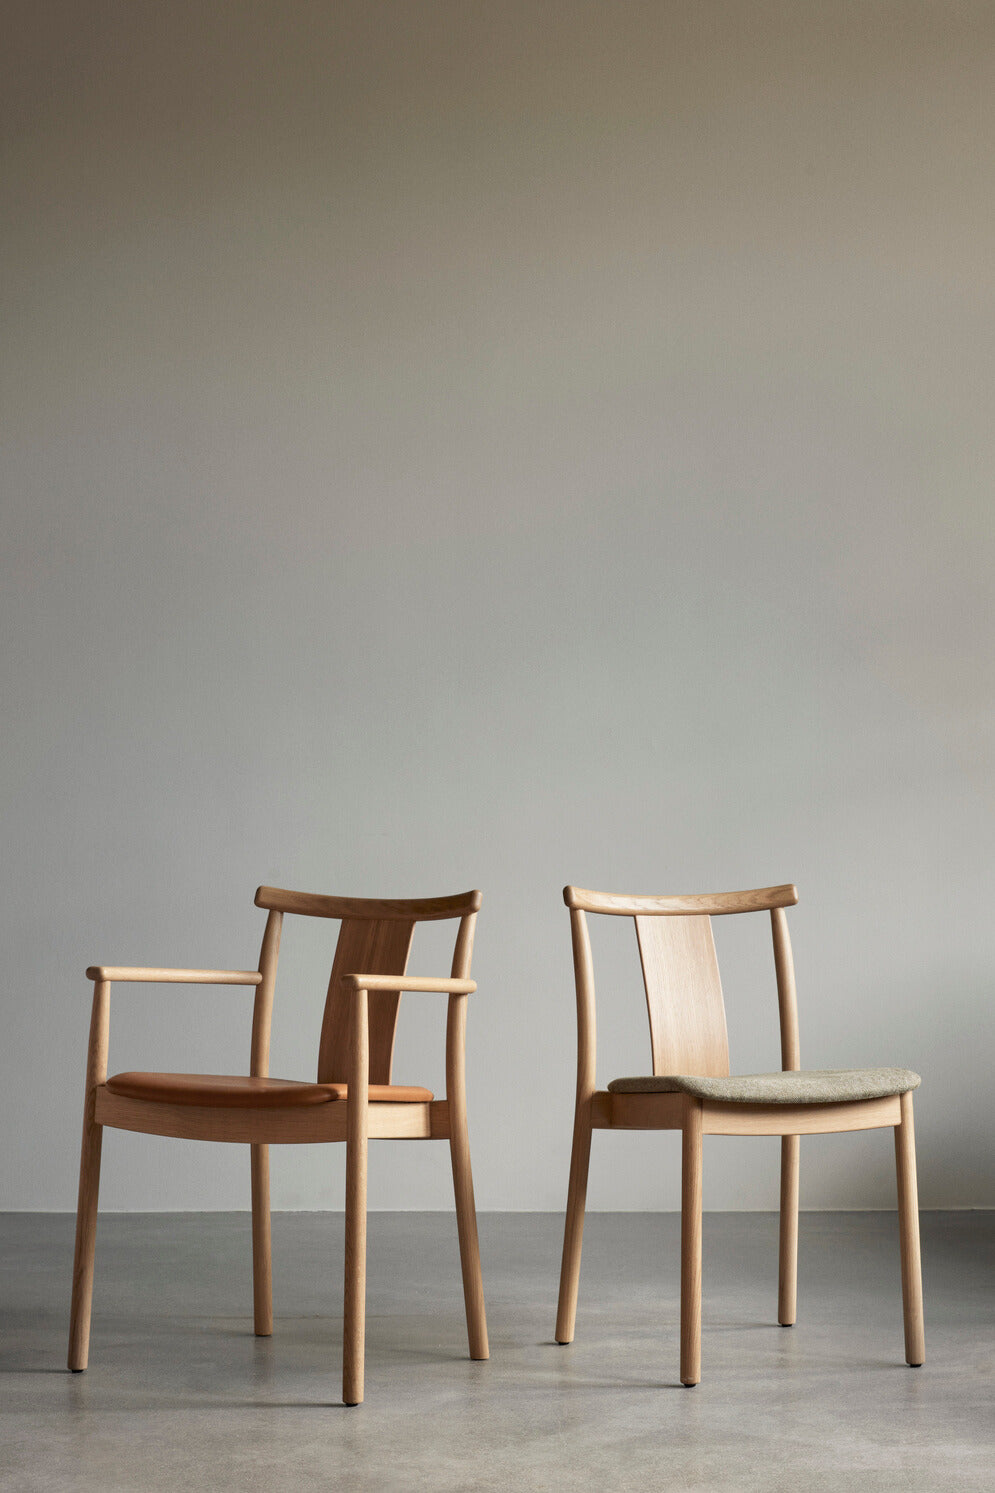 Two Merkur Dining Chairs with upholstery by Audo Copenhagen. The left chair has upholstery Dakar 0250 and the right chair has Hallingdal 65 200.